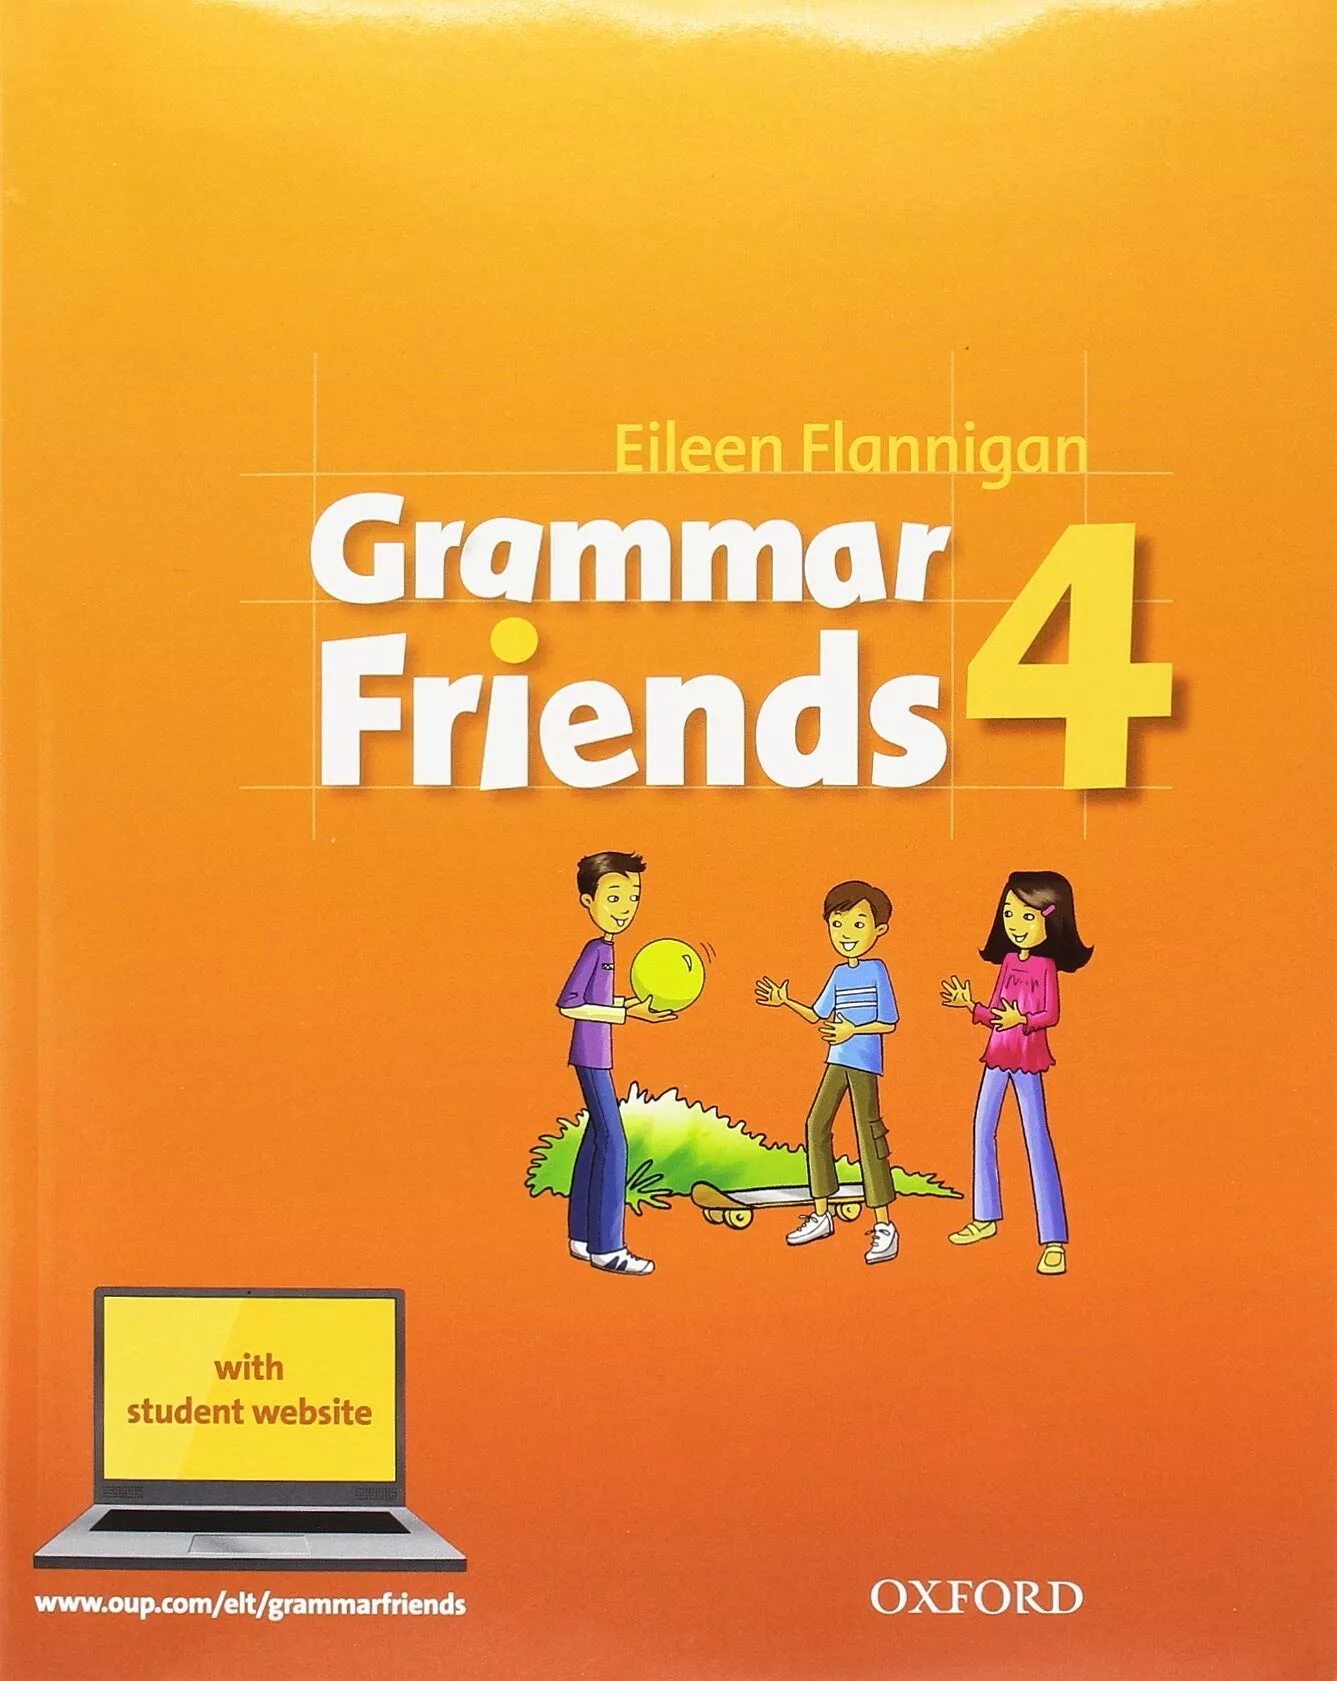 Students book 6. Грамматика Family and friends 4. Английский язык Family and friends 4 Grammar Frends ответы. Family and friends 4 Grammar book. Family and friends грамматика.